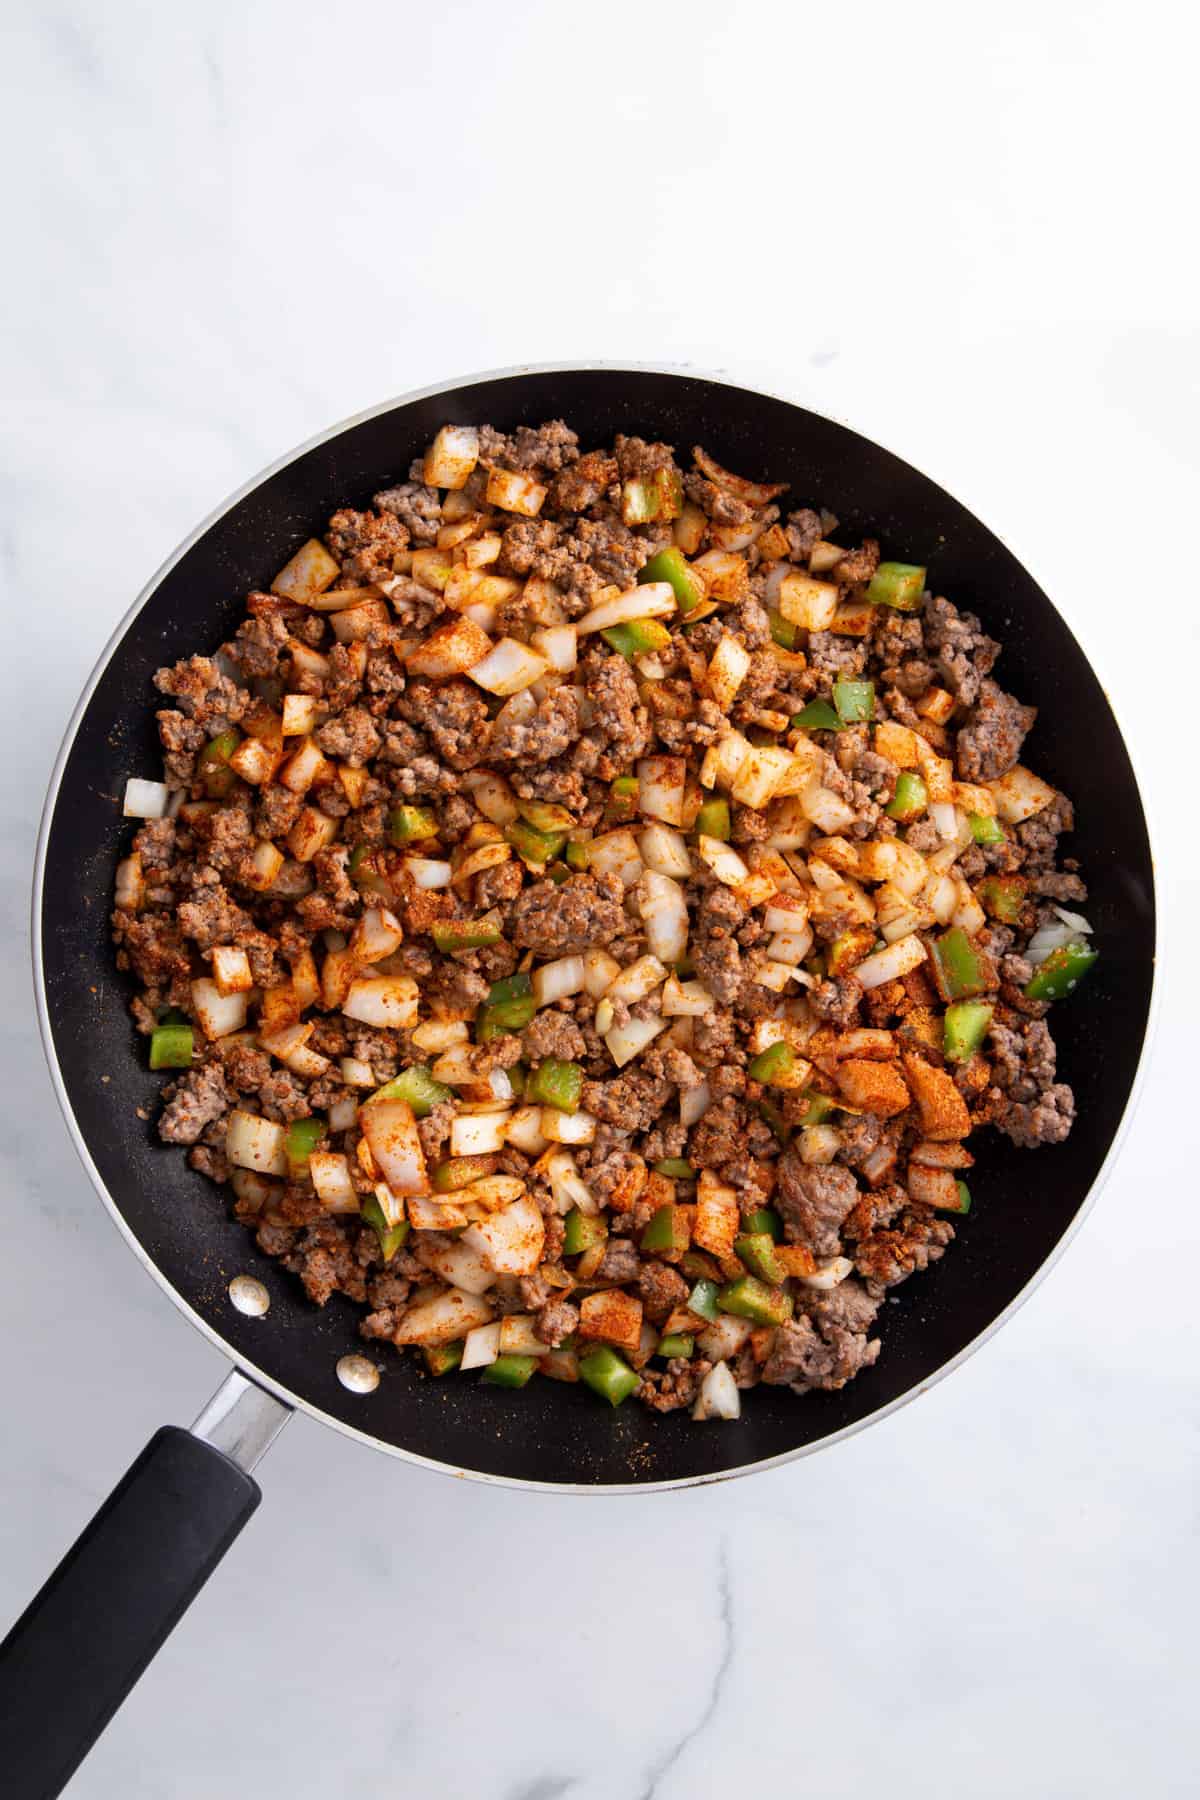 taco meat cooked with chopped veggies